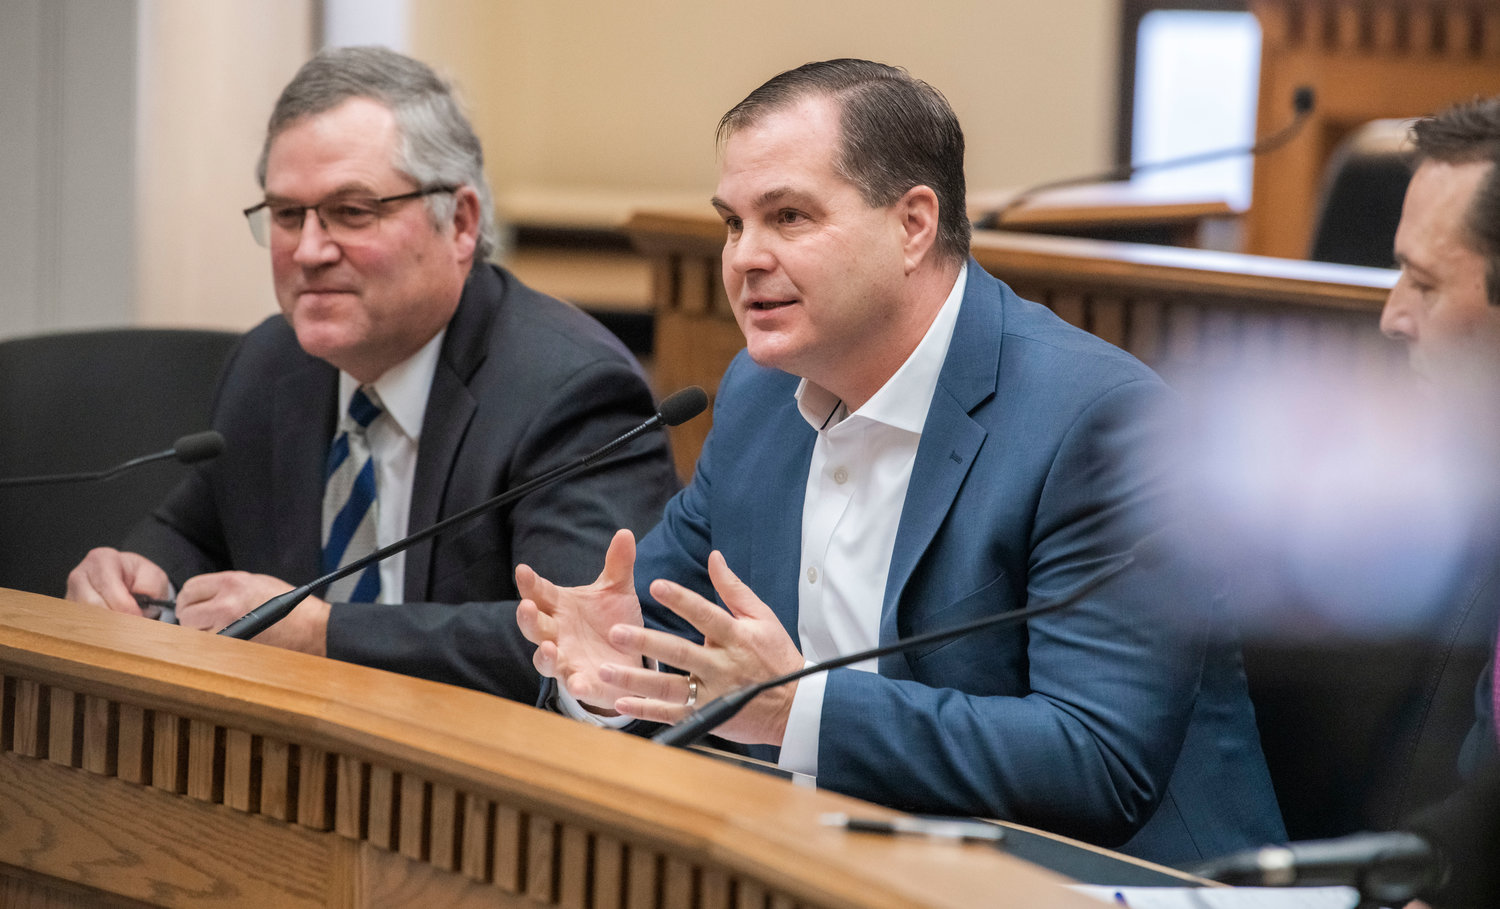 State Rep. J.T. Wilcox, R-Yelm, and Sen. John Braun, R-Centralia, talk to members of the press inside the John A. Cherberg Building in Olympia earlier this month.